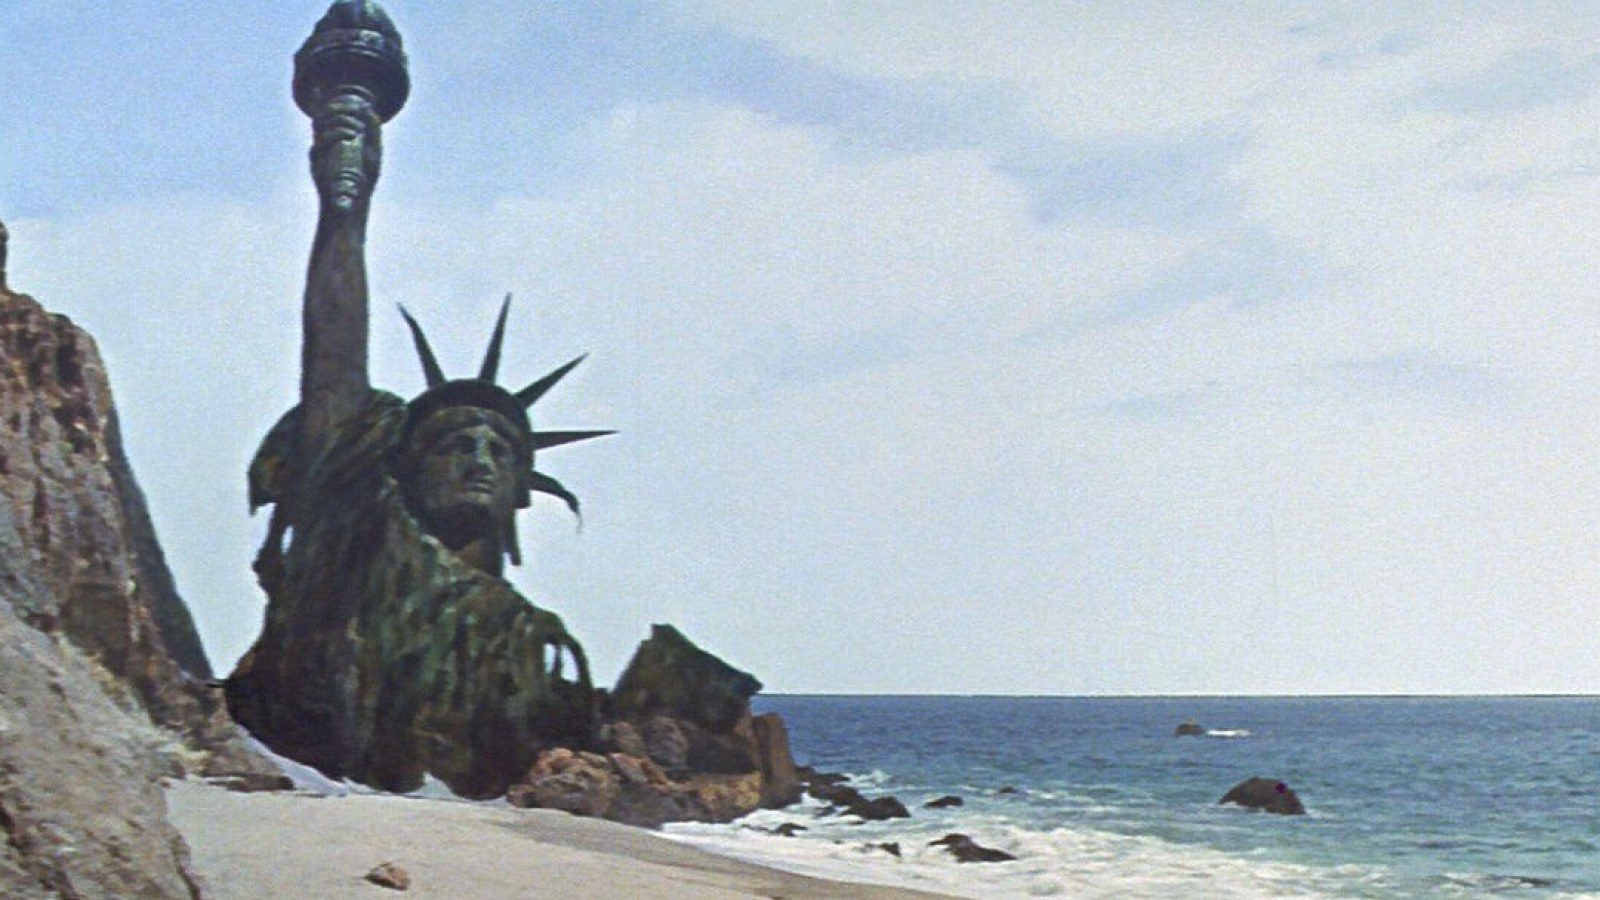 The final scene from the 1968 film Planet of the Apes